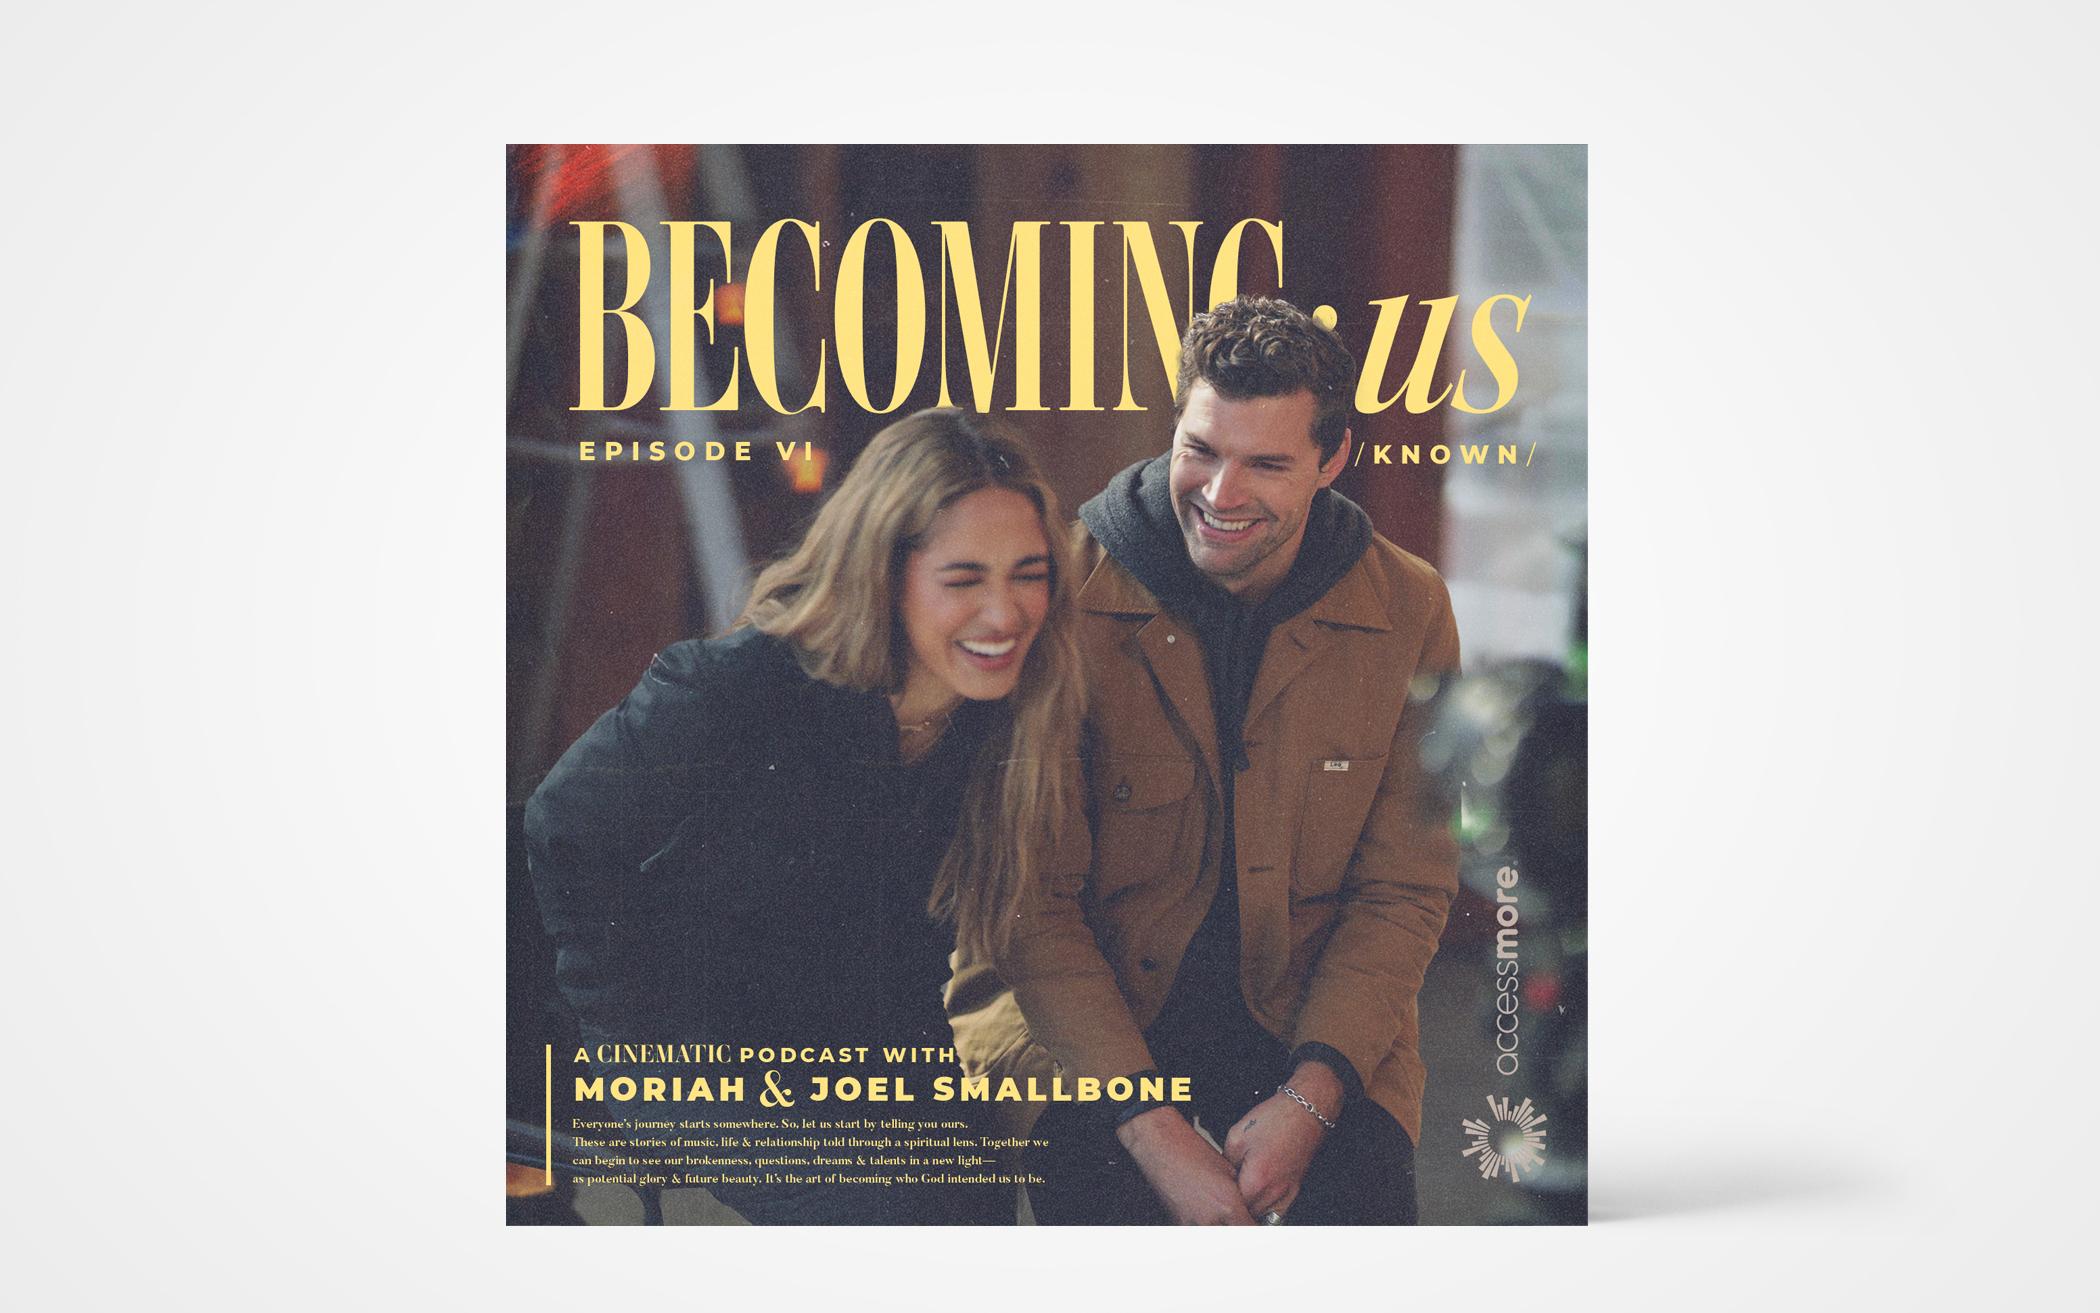 BECOMING:us Podcast